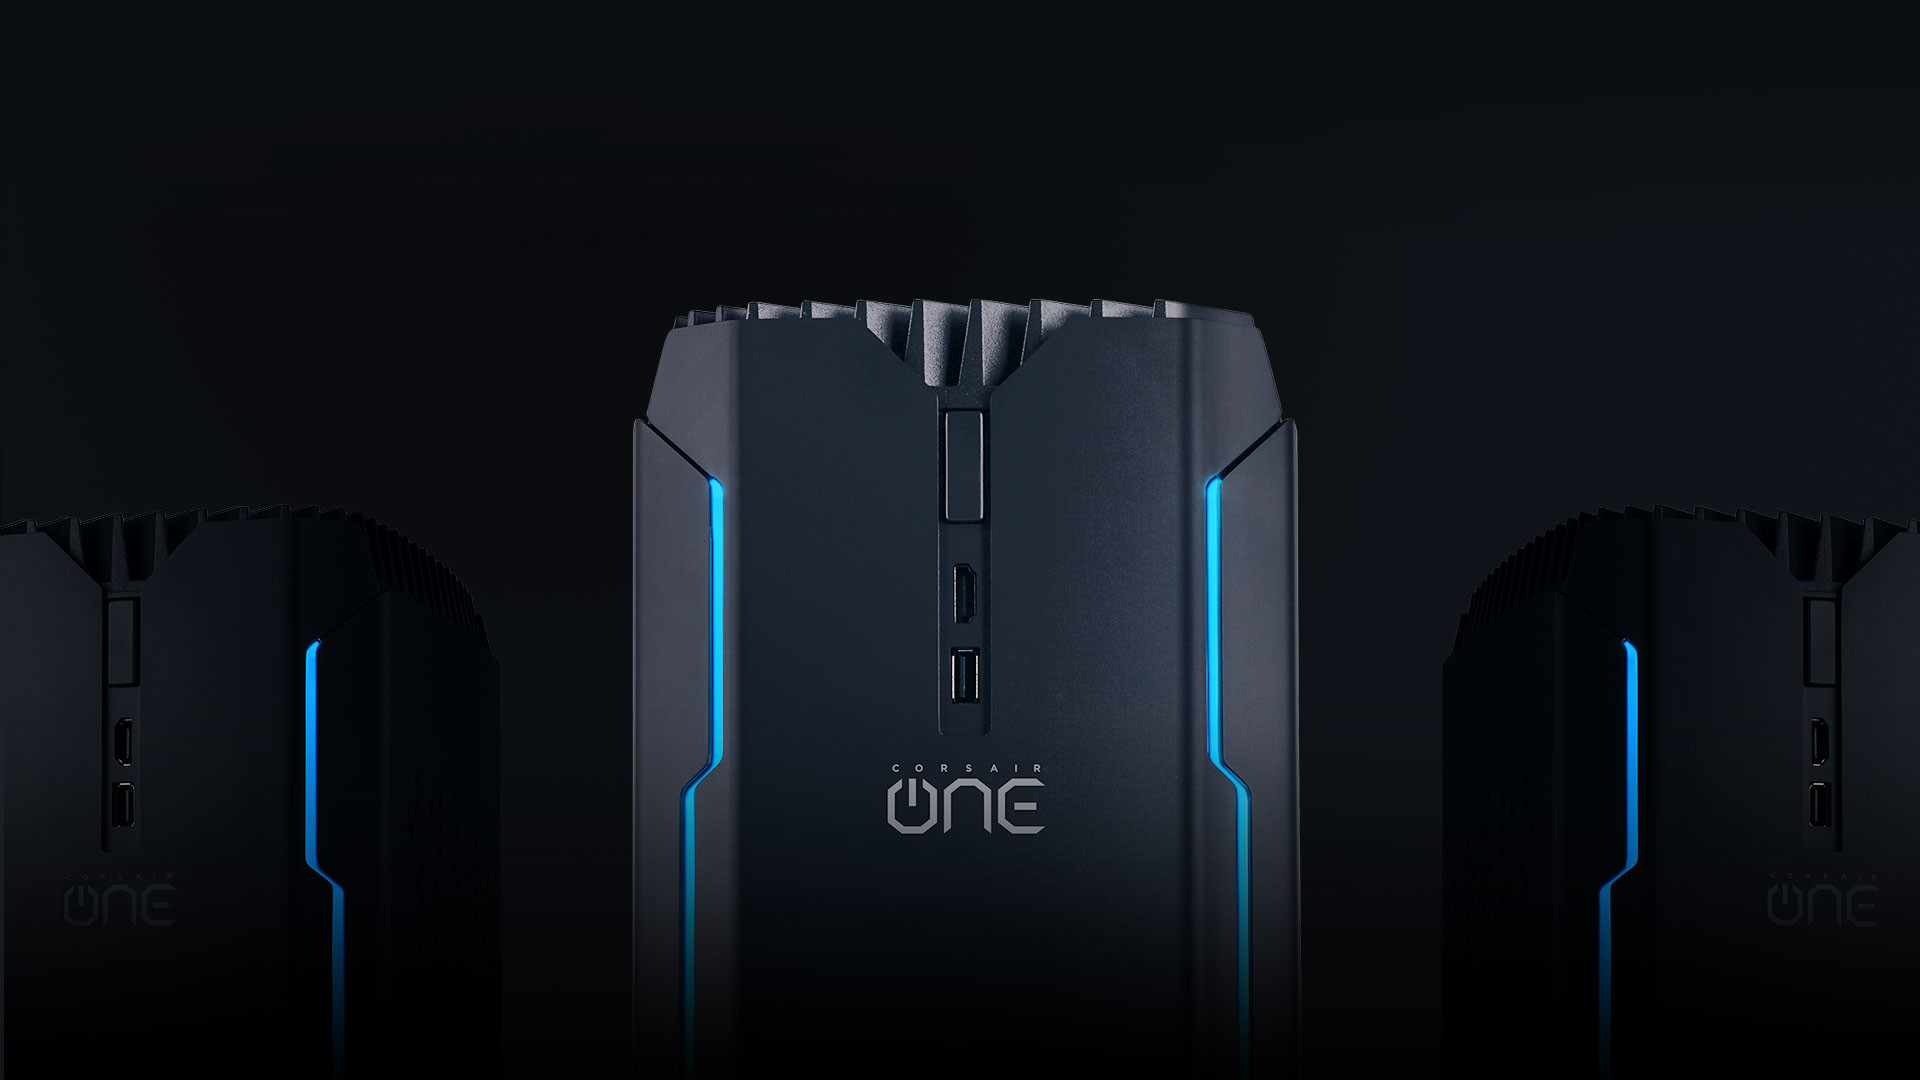 Corsair has announced its building a category defying gaming PC called the Corsair One. The US company is famous for producing dedicated PC gaming